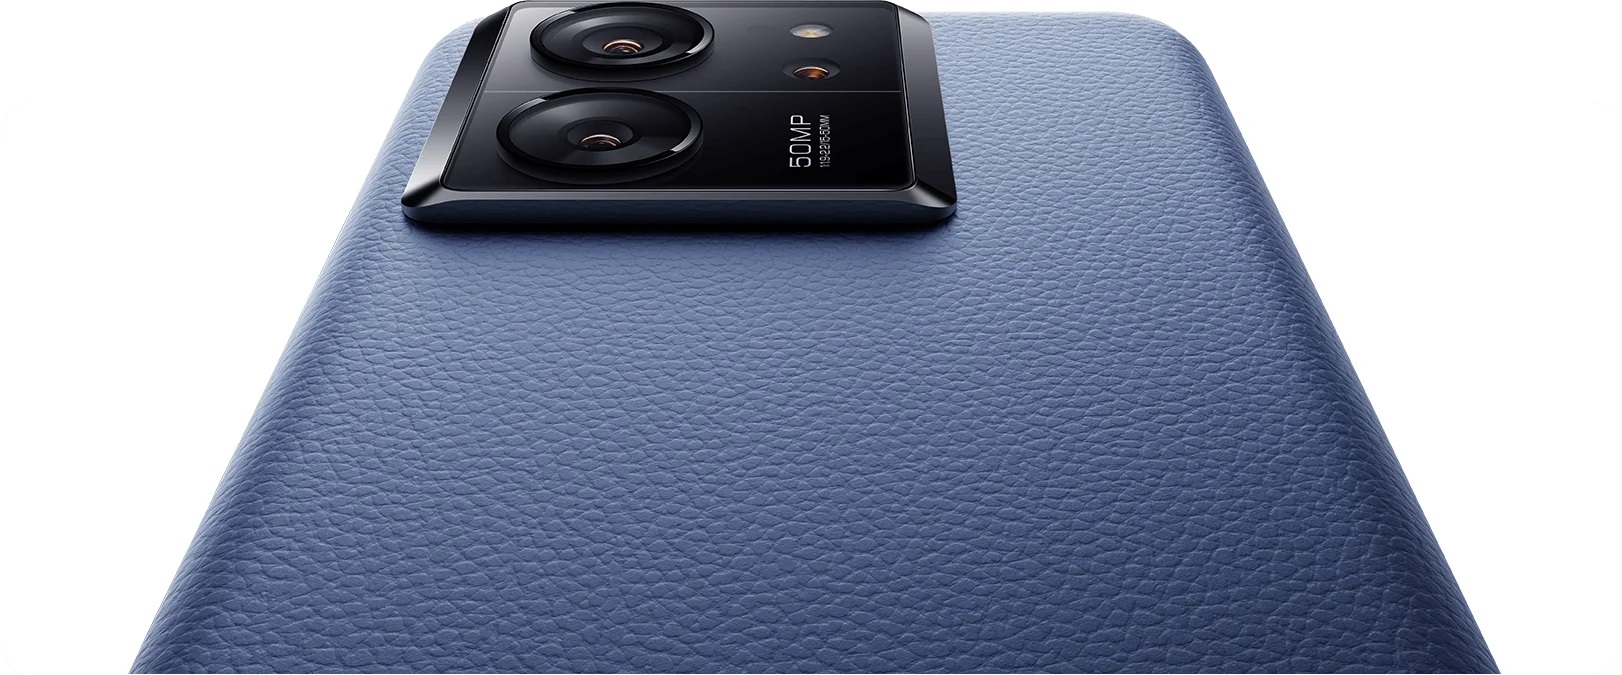 Something missing: Xiaomi sells Xiaomi 13T smartphones without Leica  cameras in some countries